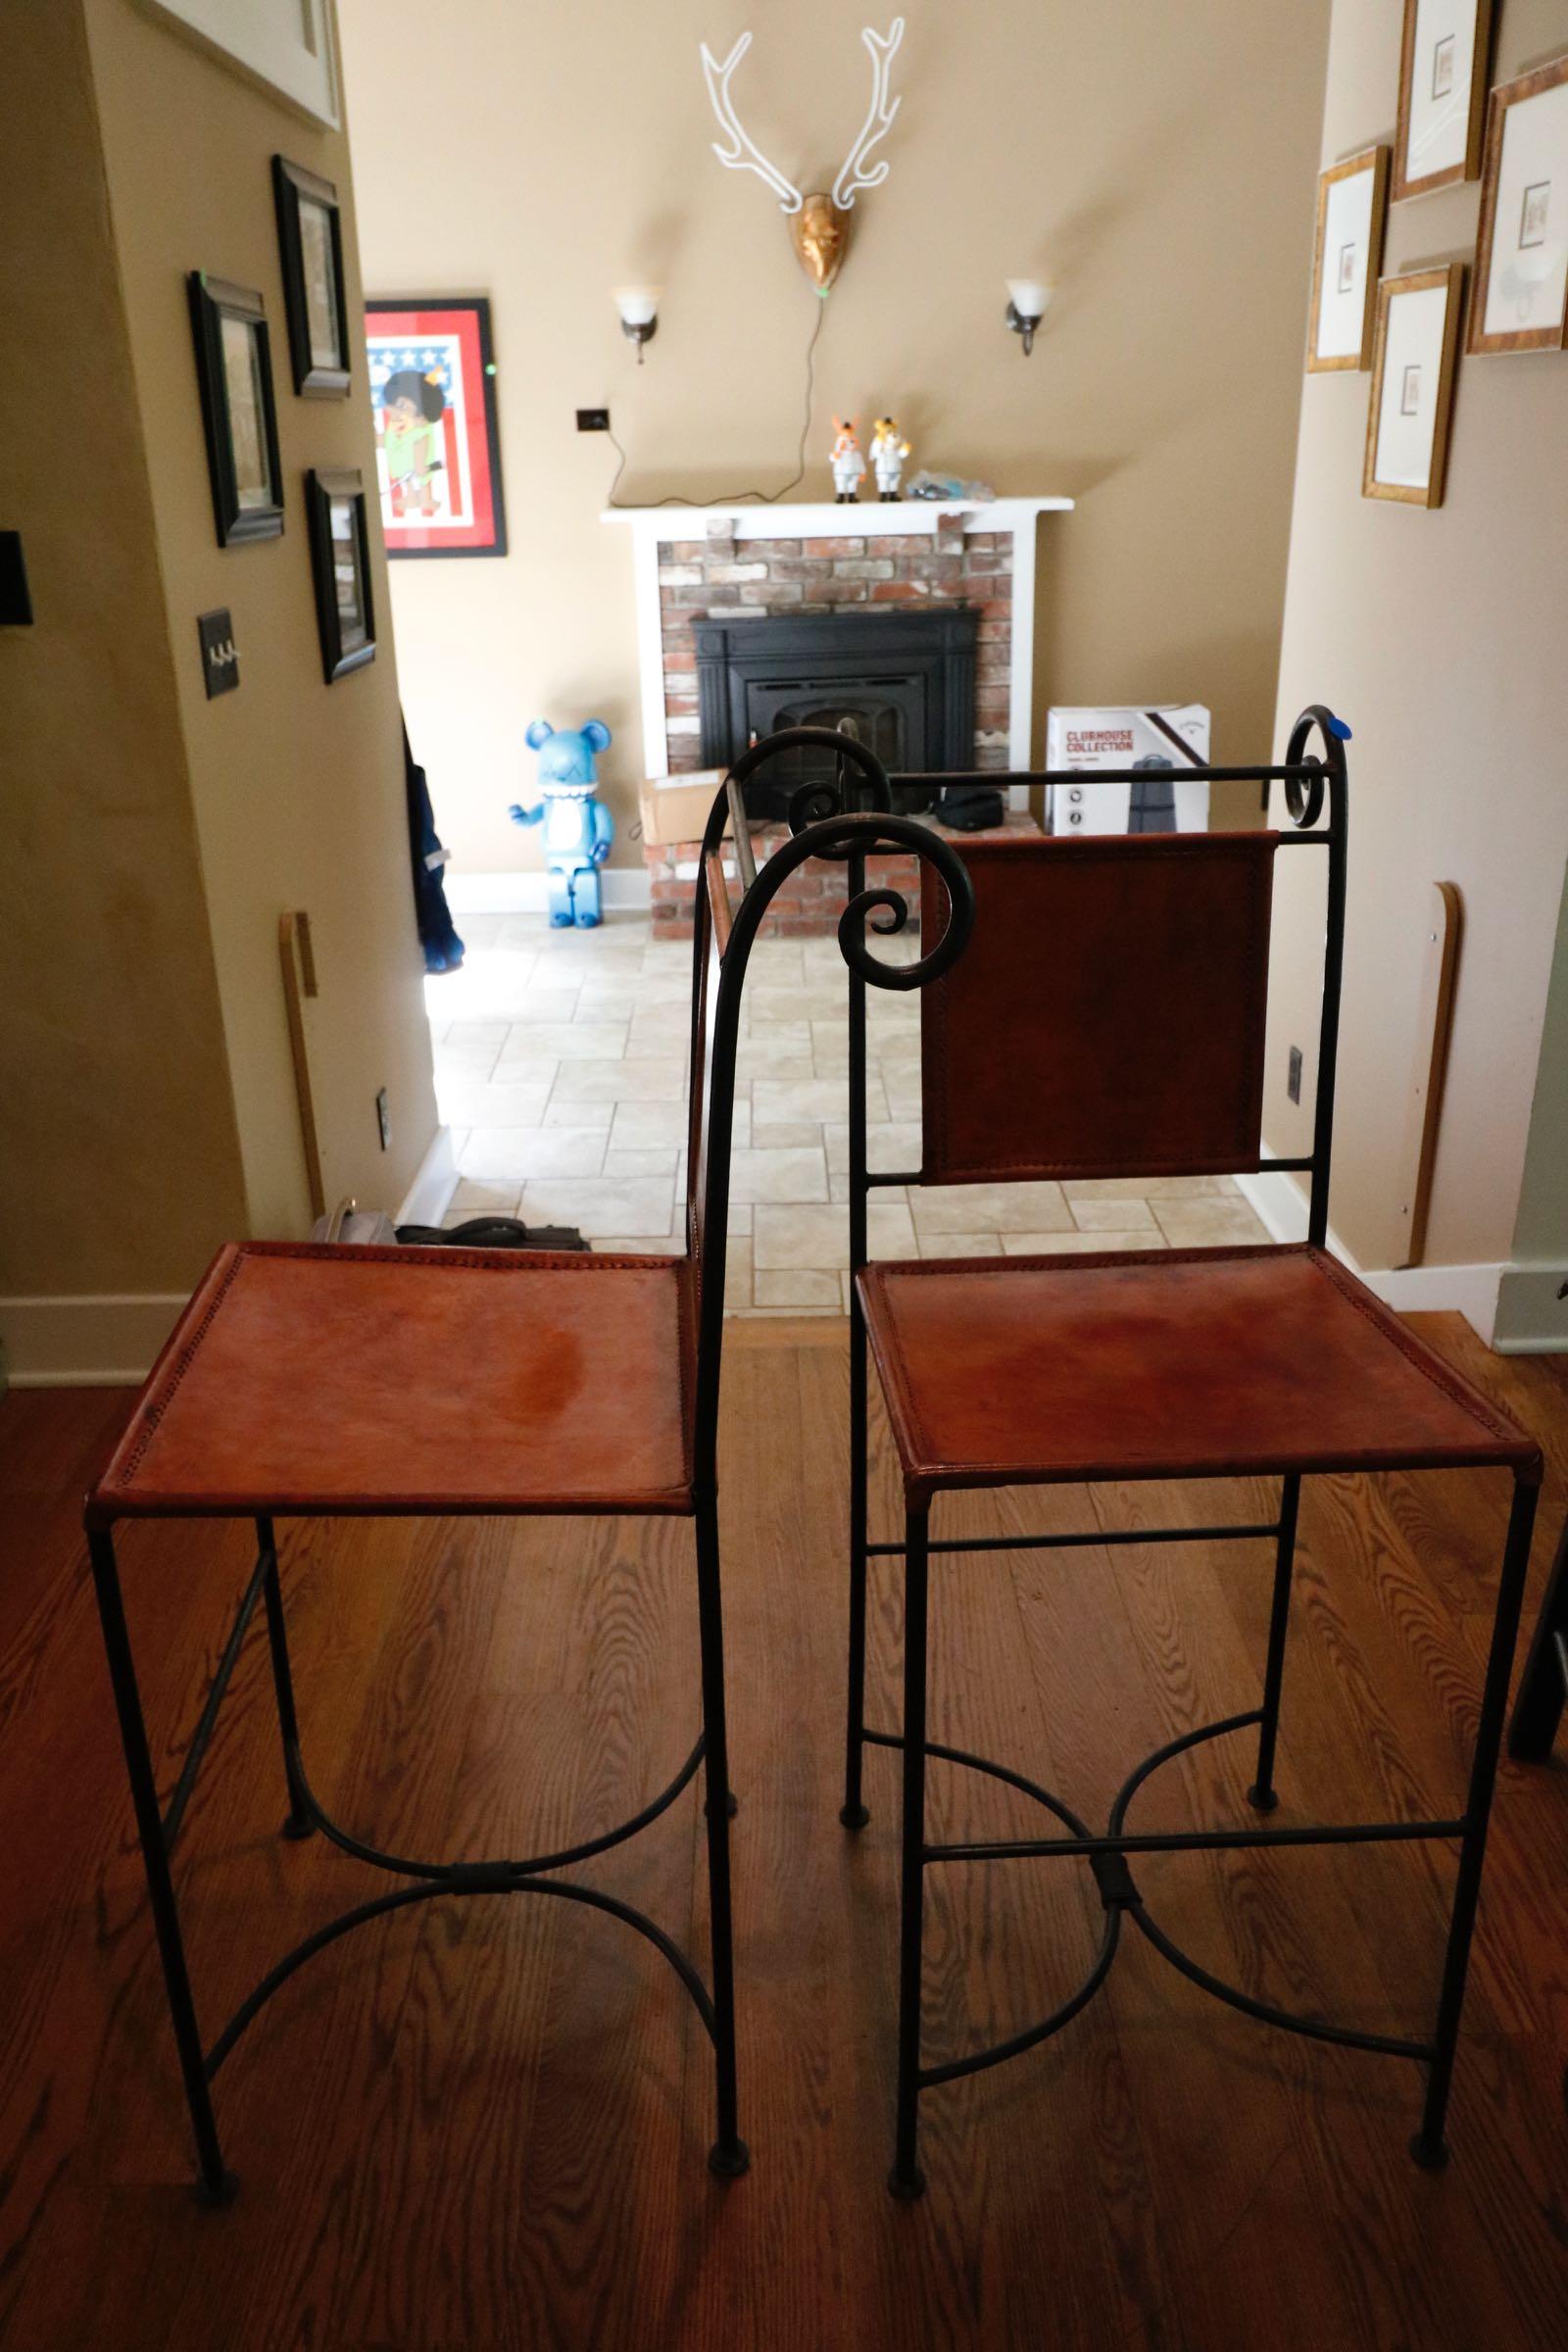 Spanish Ralph Lauren Bar Stools Leather and Wrought Iron, Classic and Sleek All in One